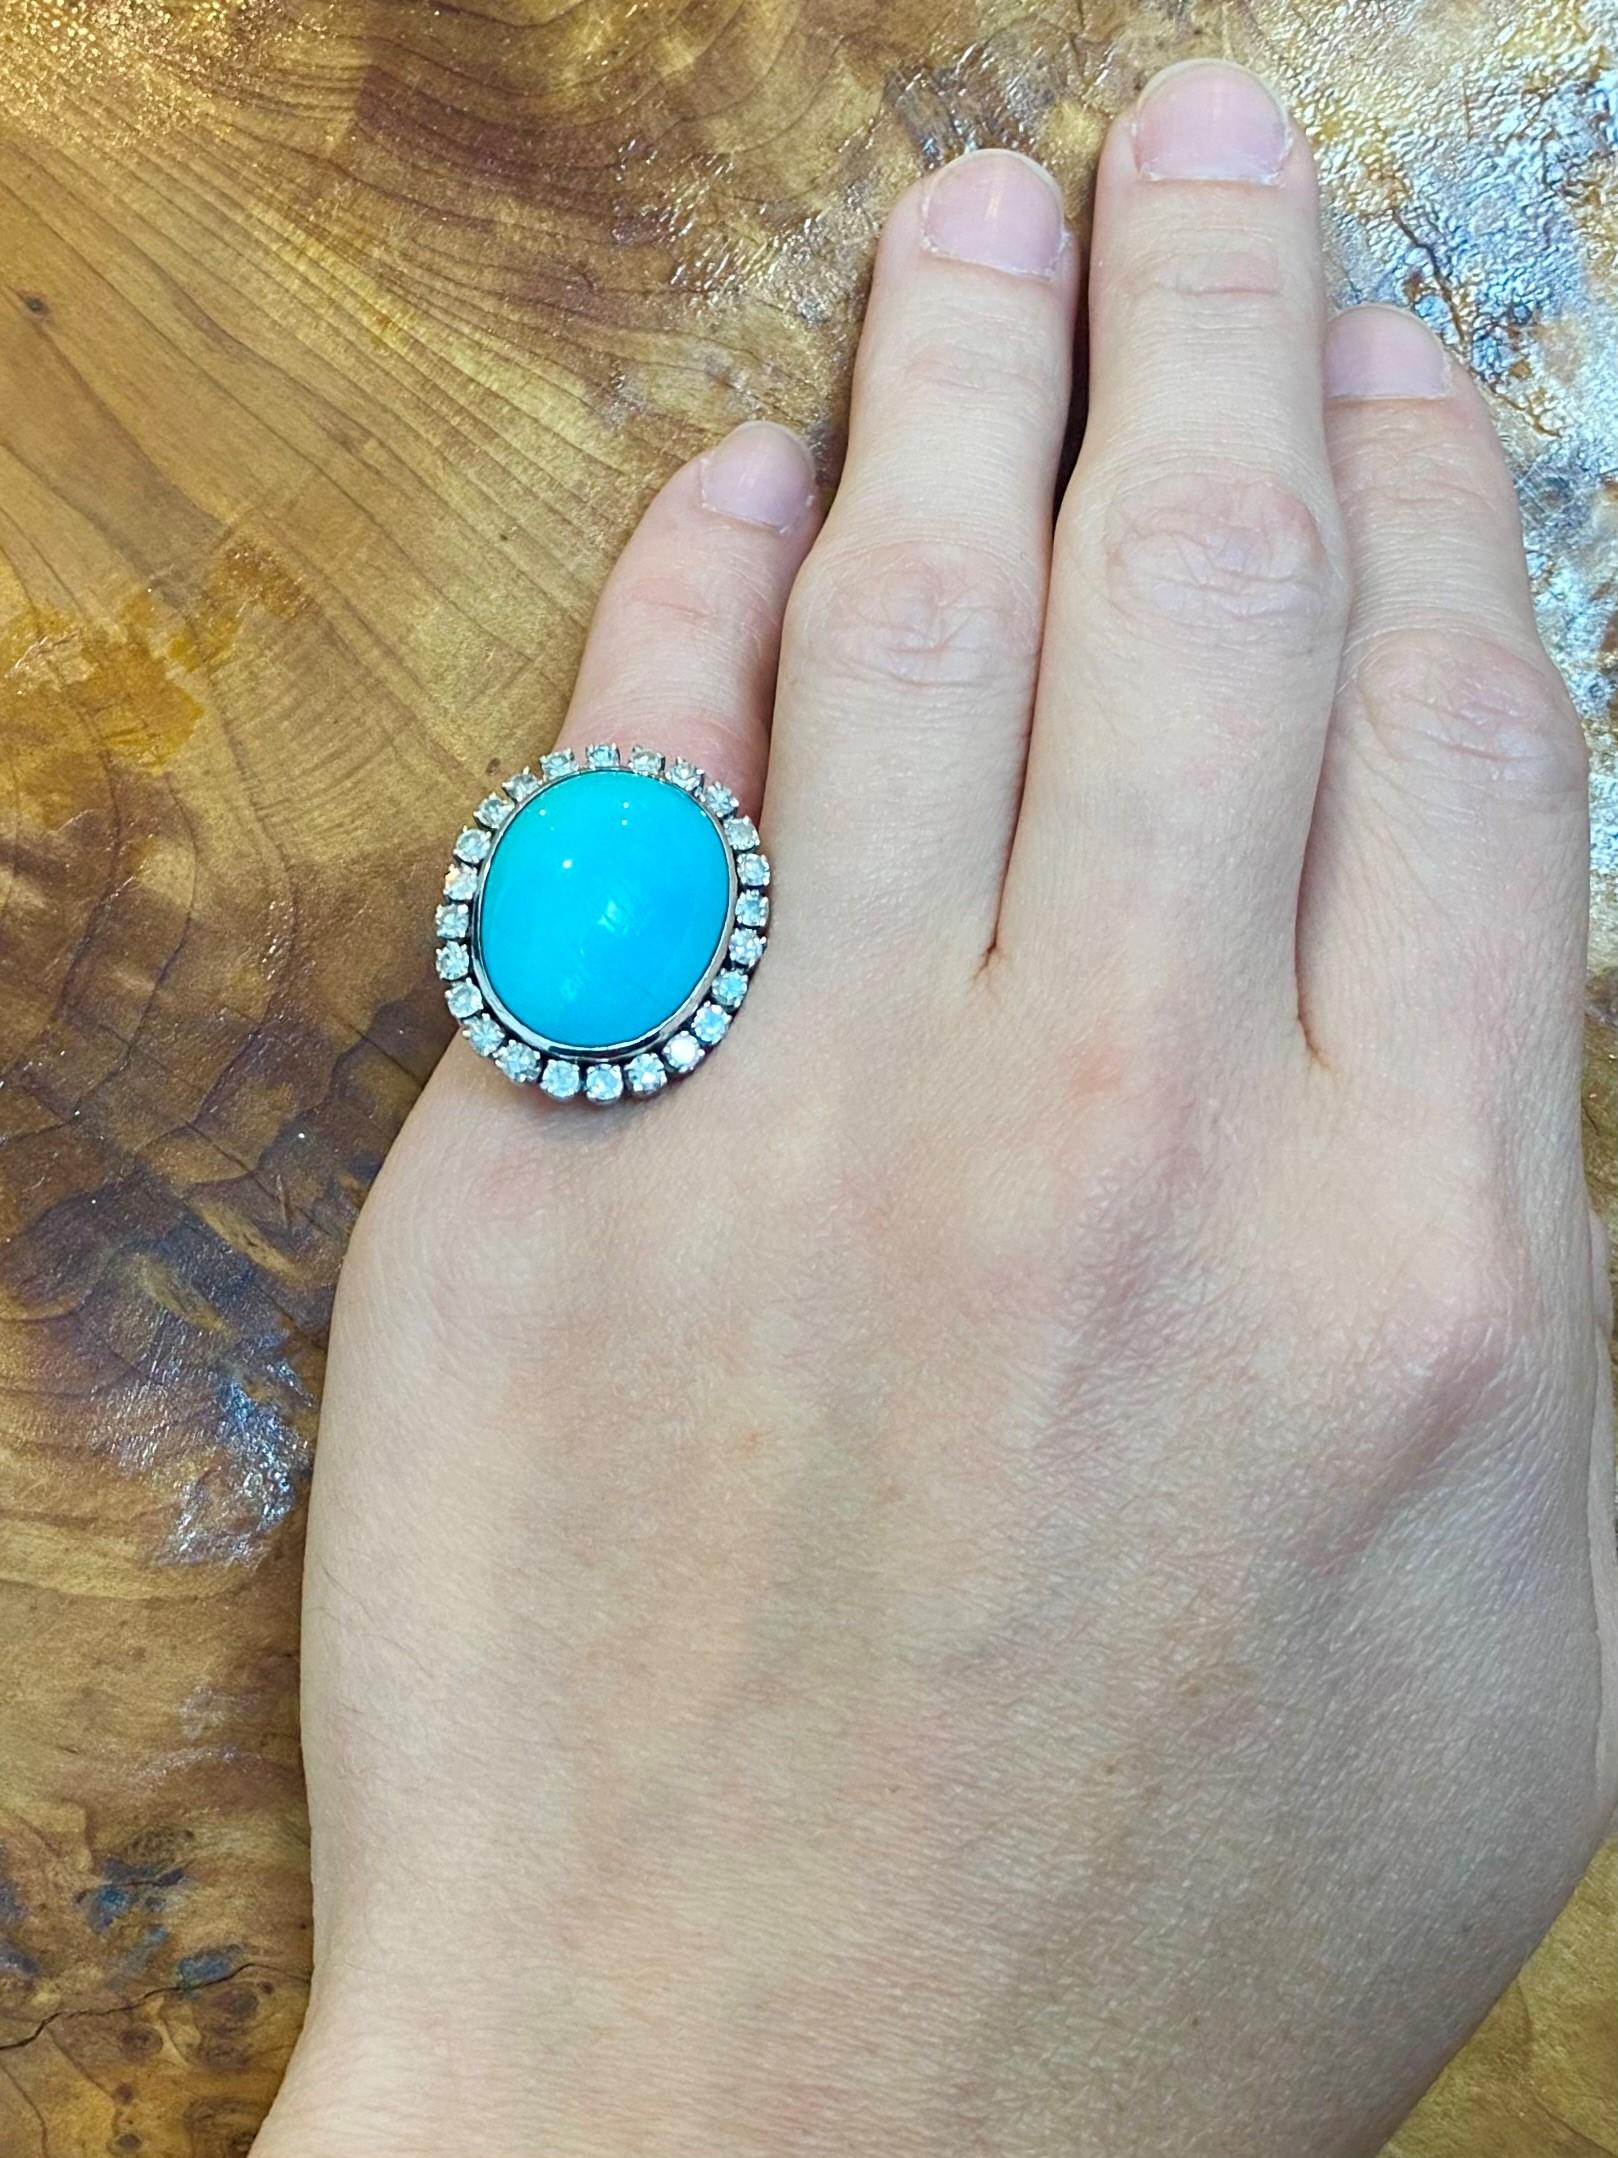 Classic gem set turquoise cocktail ring.

Beautiful and elegant ring, created during the mid-century period, circa 1950. This gem set classic cocktail ring was carefully crafted in solid .900/.999 platinum and embellished with a great selection of